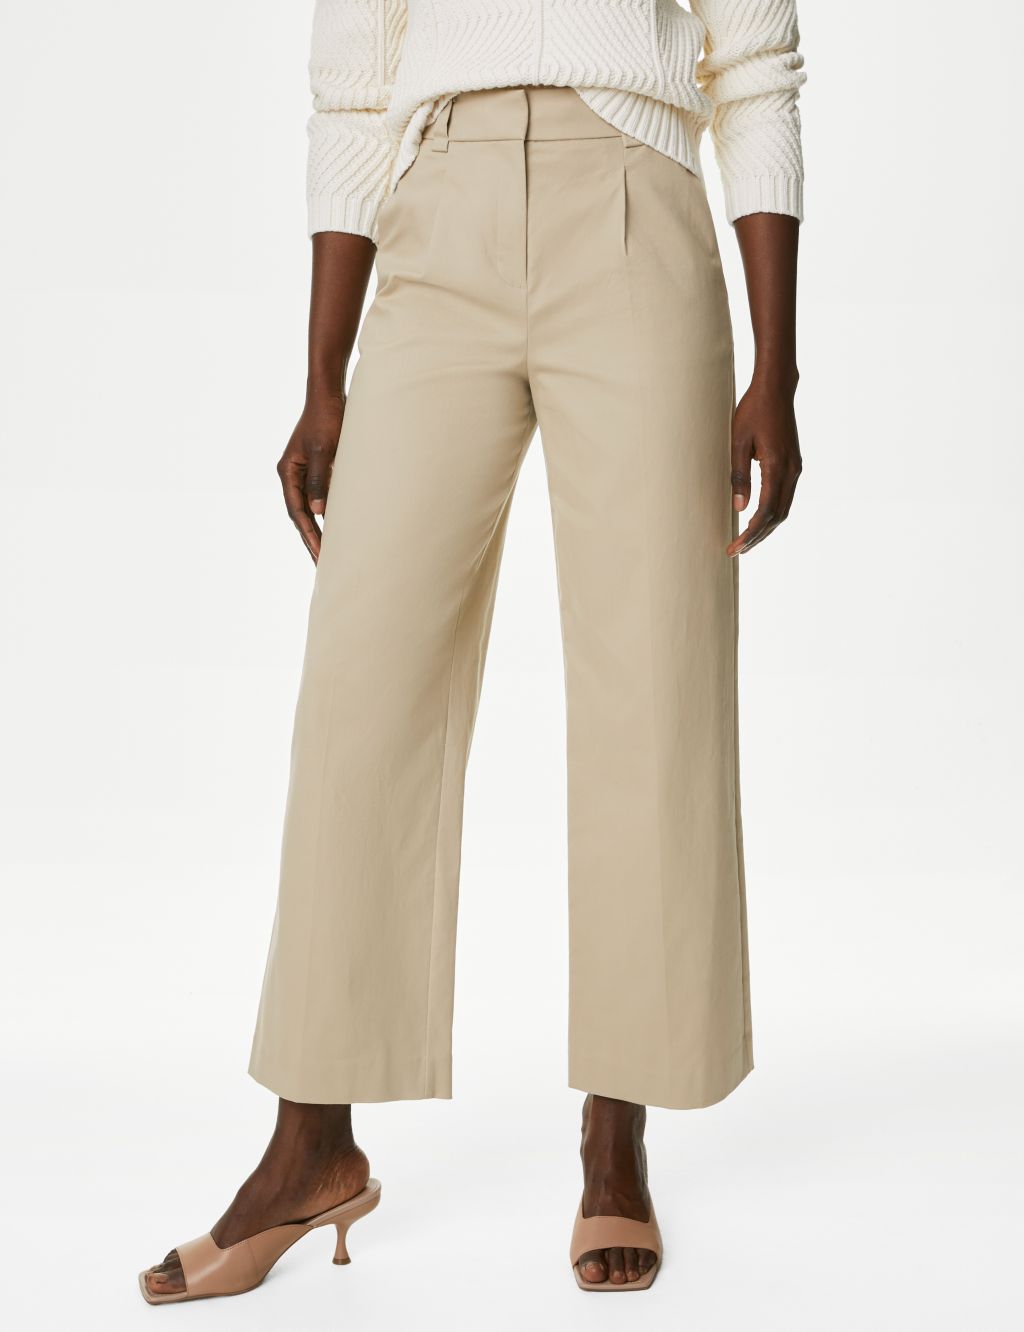 Cotton Rich Pleat Front Wide Leg Chinos image 3